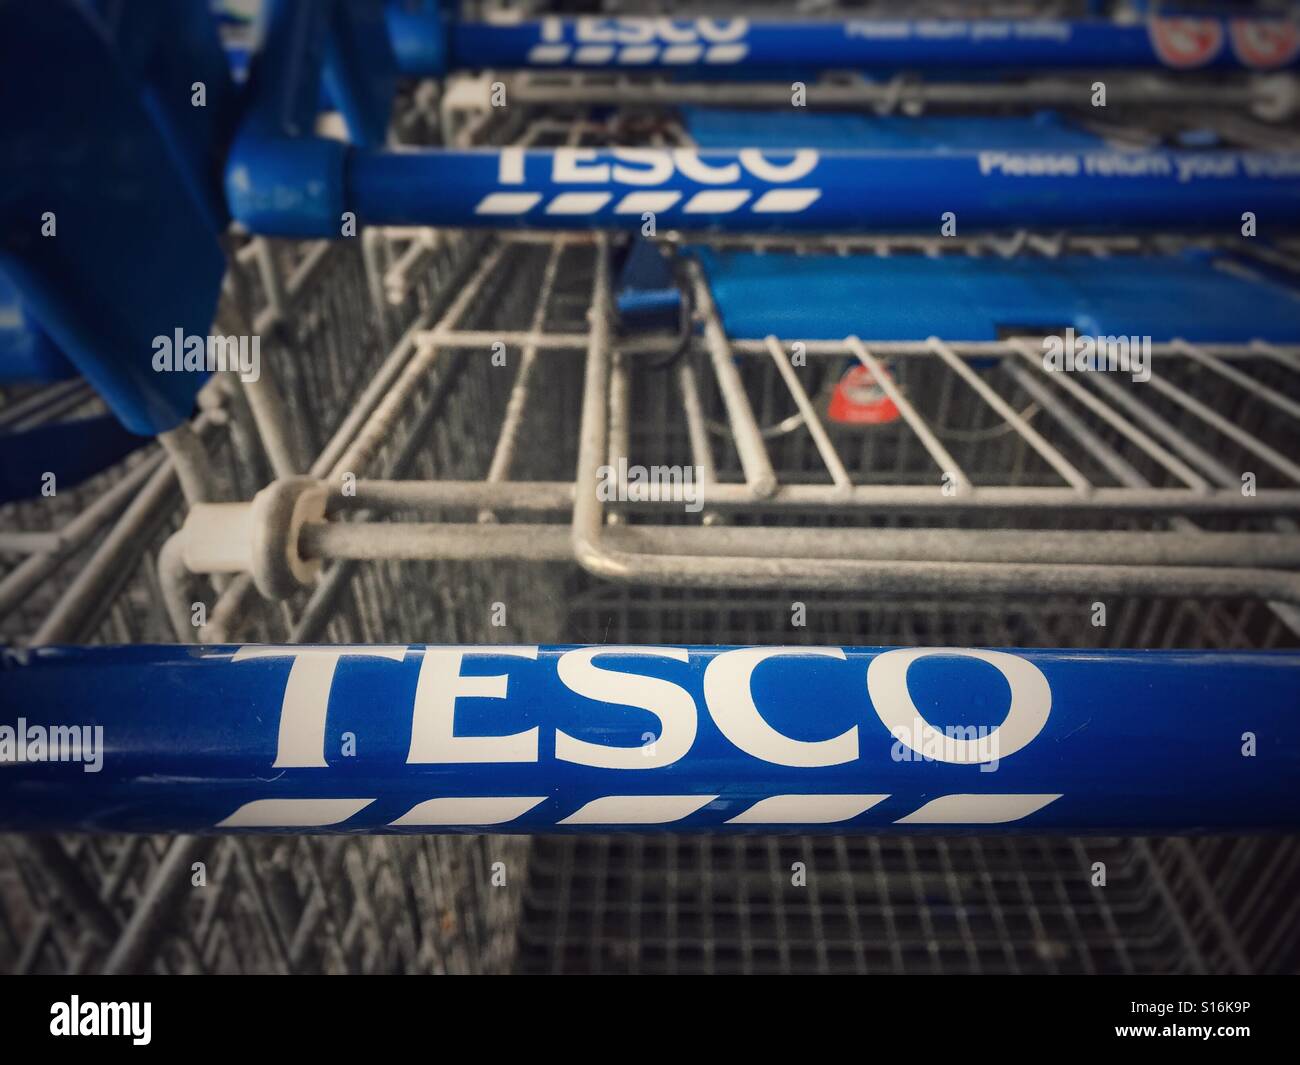 A row of Supermarket, Tesco, trolleys clearly showing the Tesco brand name  on the trolley handles Stock Photo - Alamy